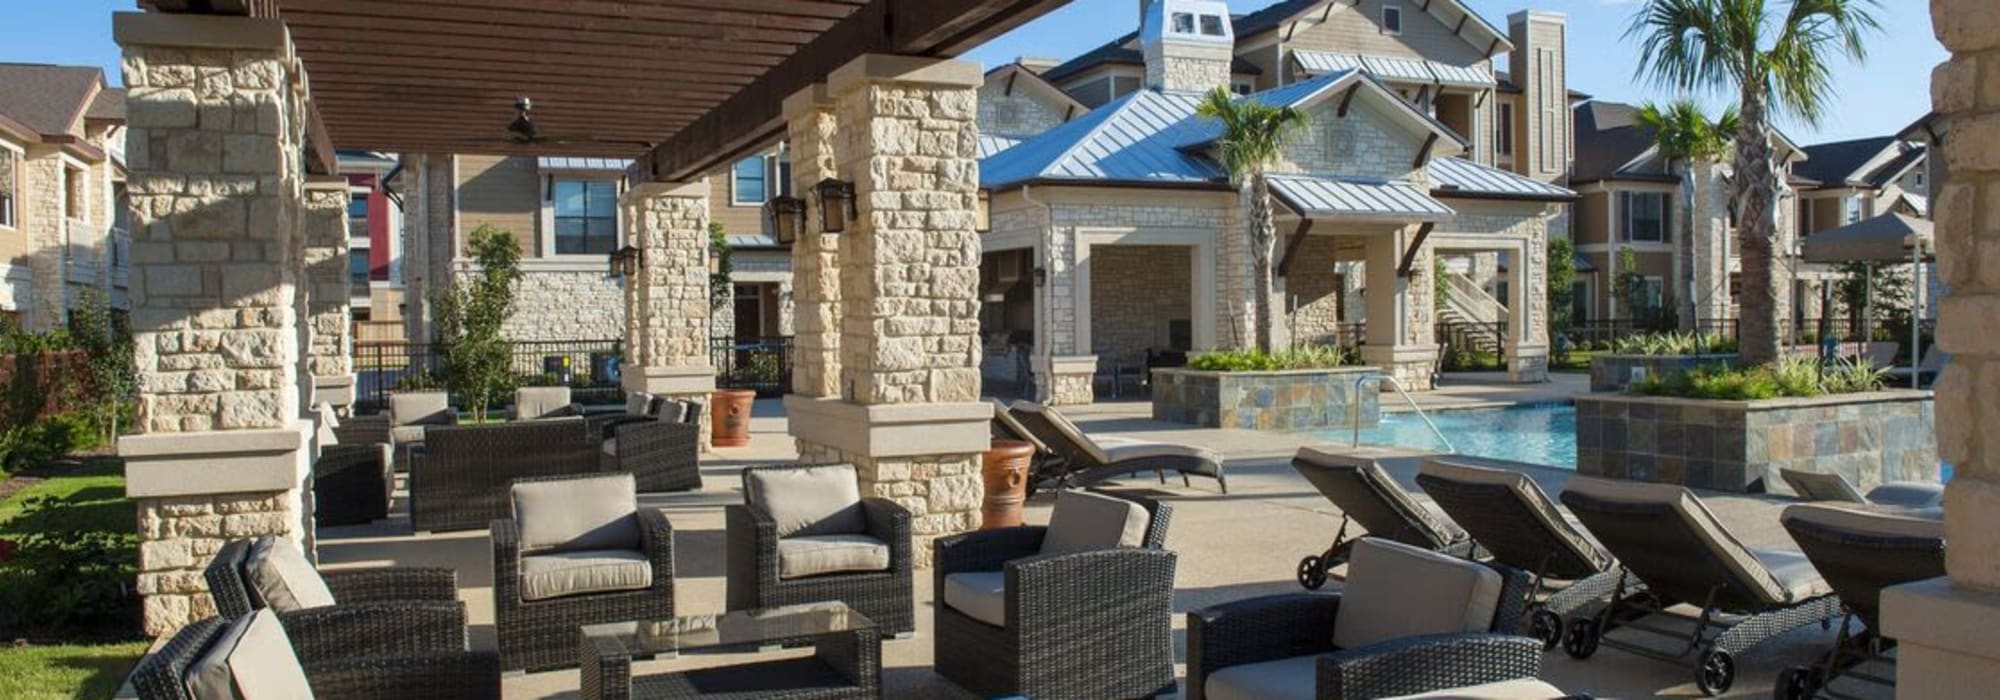 Poolside bbq area at The Crossing at Katy Ranch in Katy, Texas